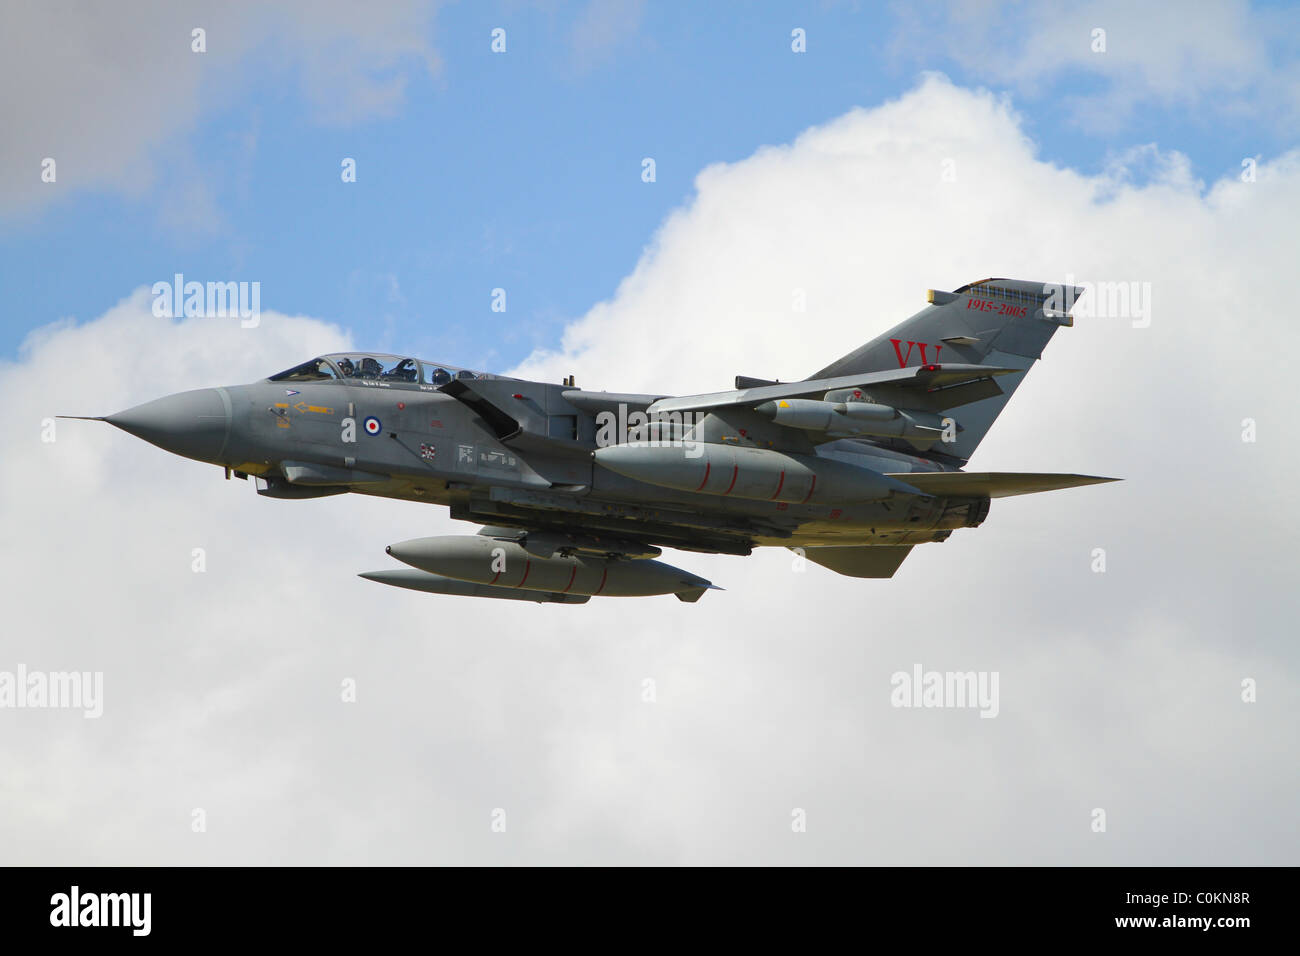 military aircraft in flight Stock Photo